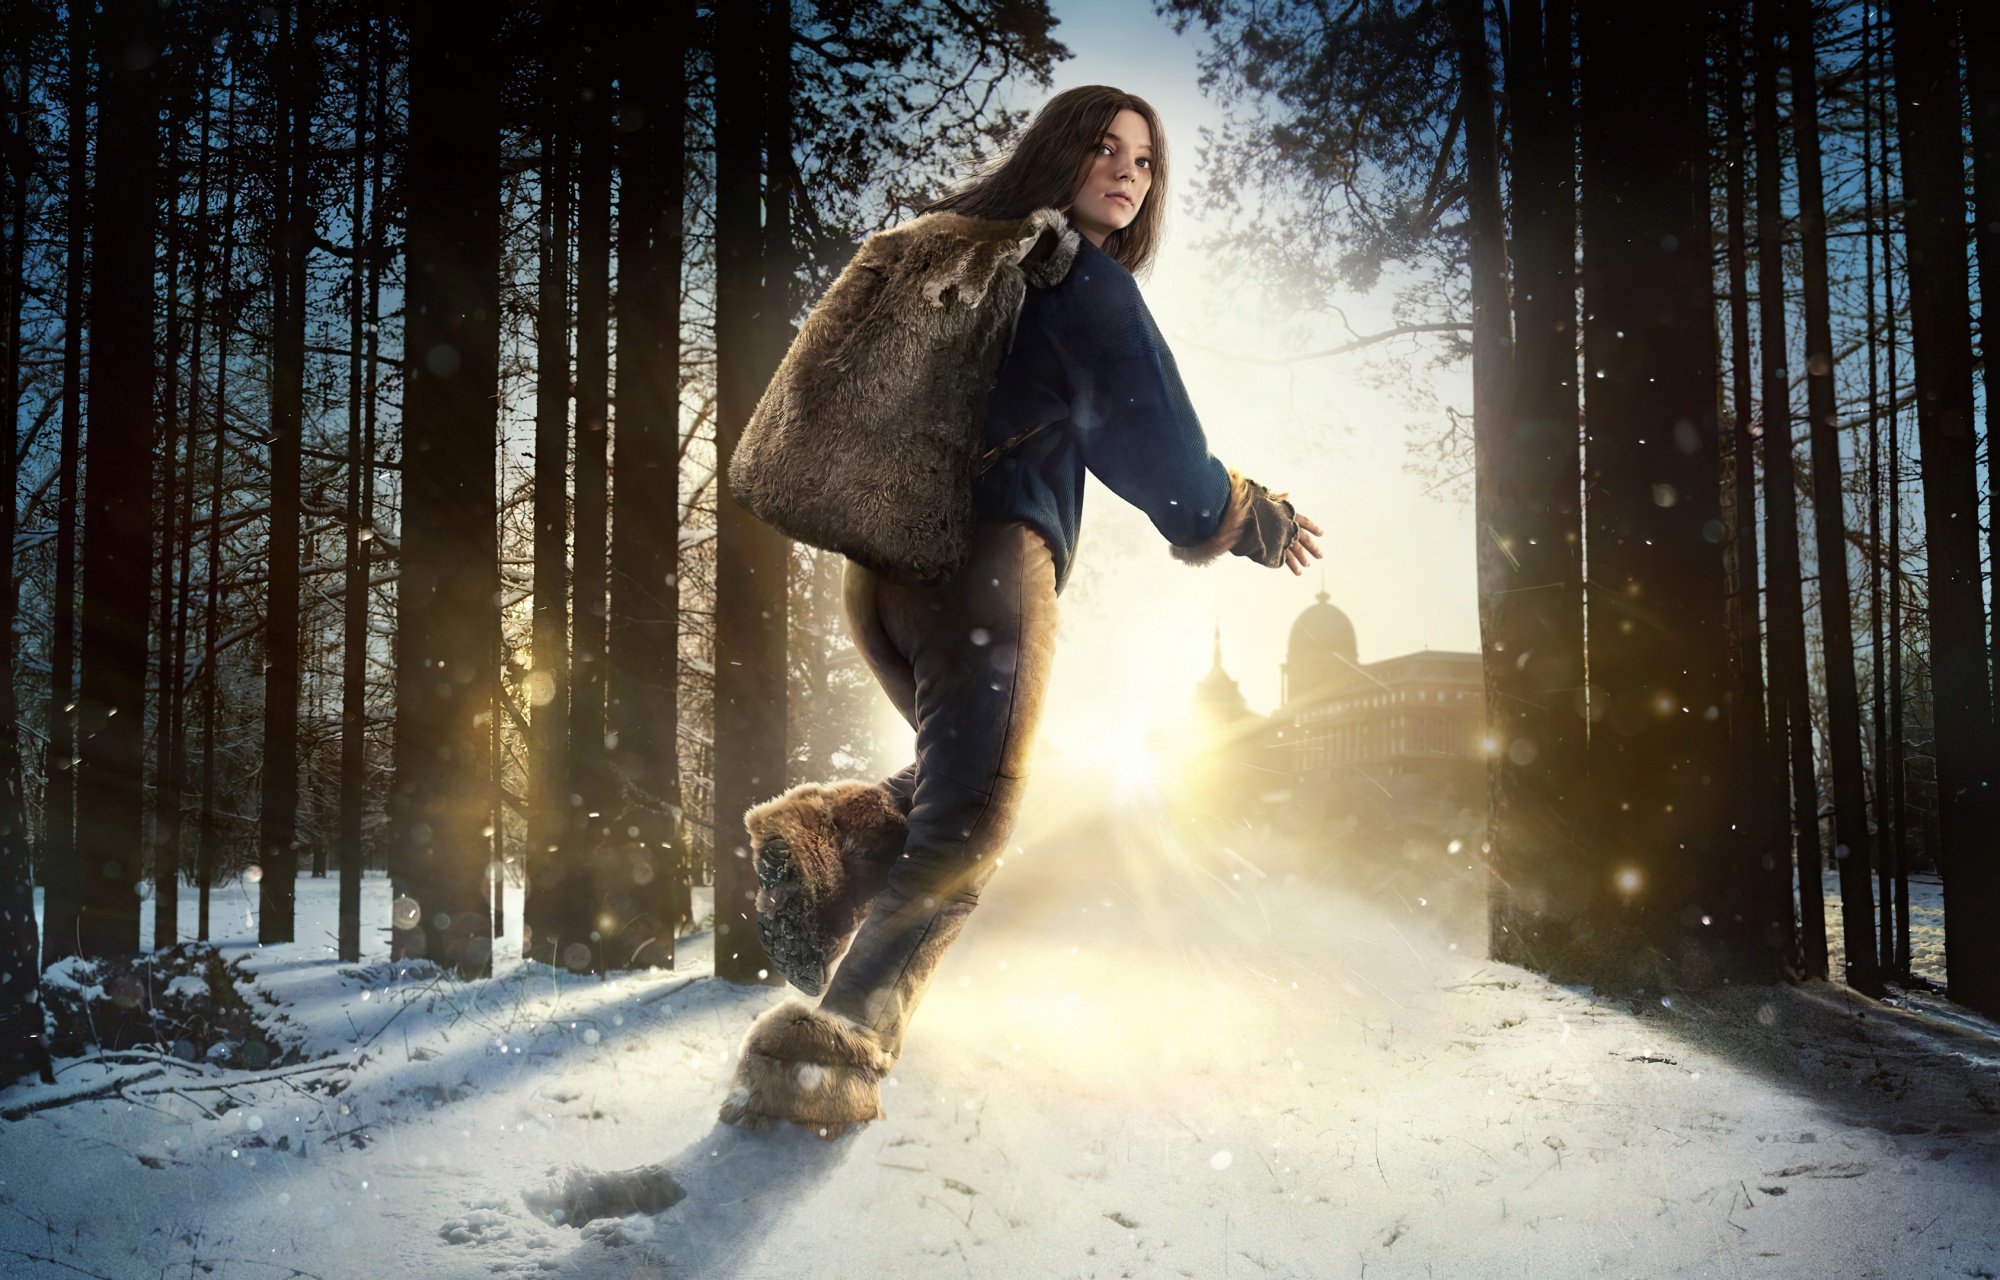 binge watch with your teens, Hanna, Amazon Prime, young girl running in the snow forest